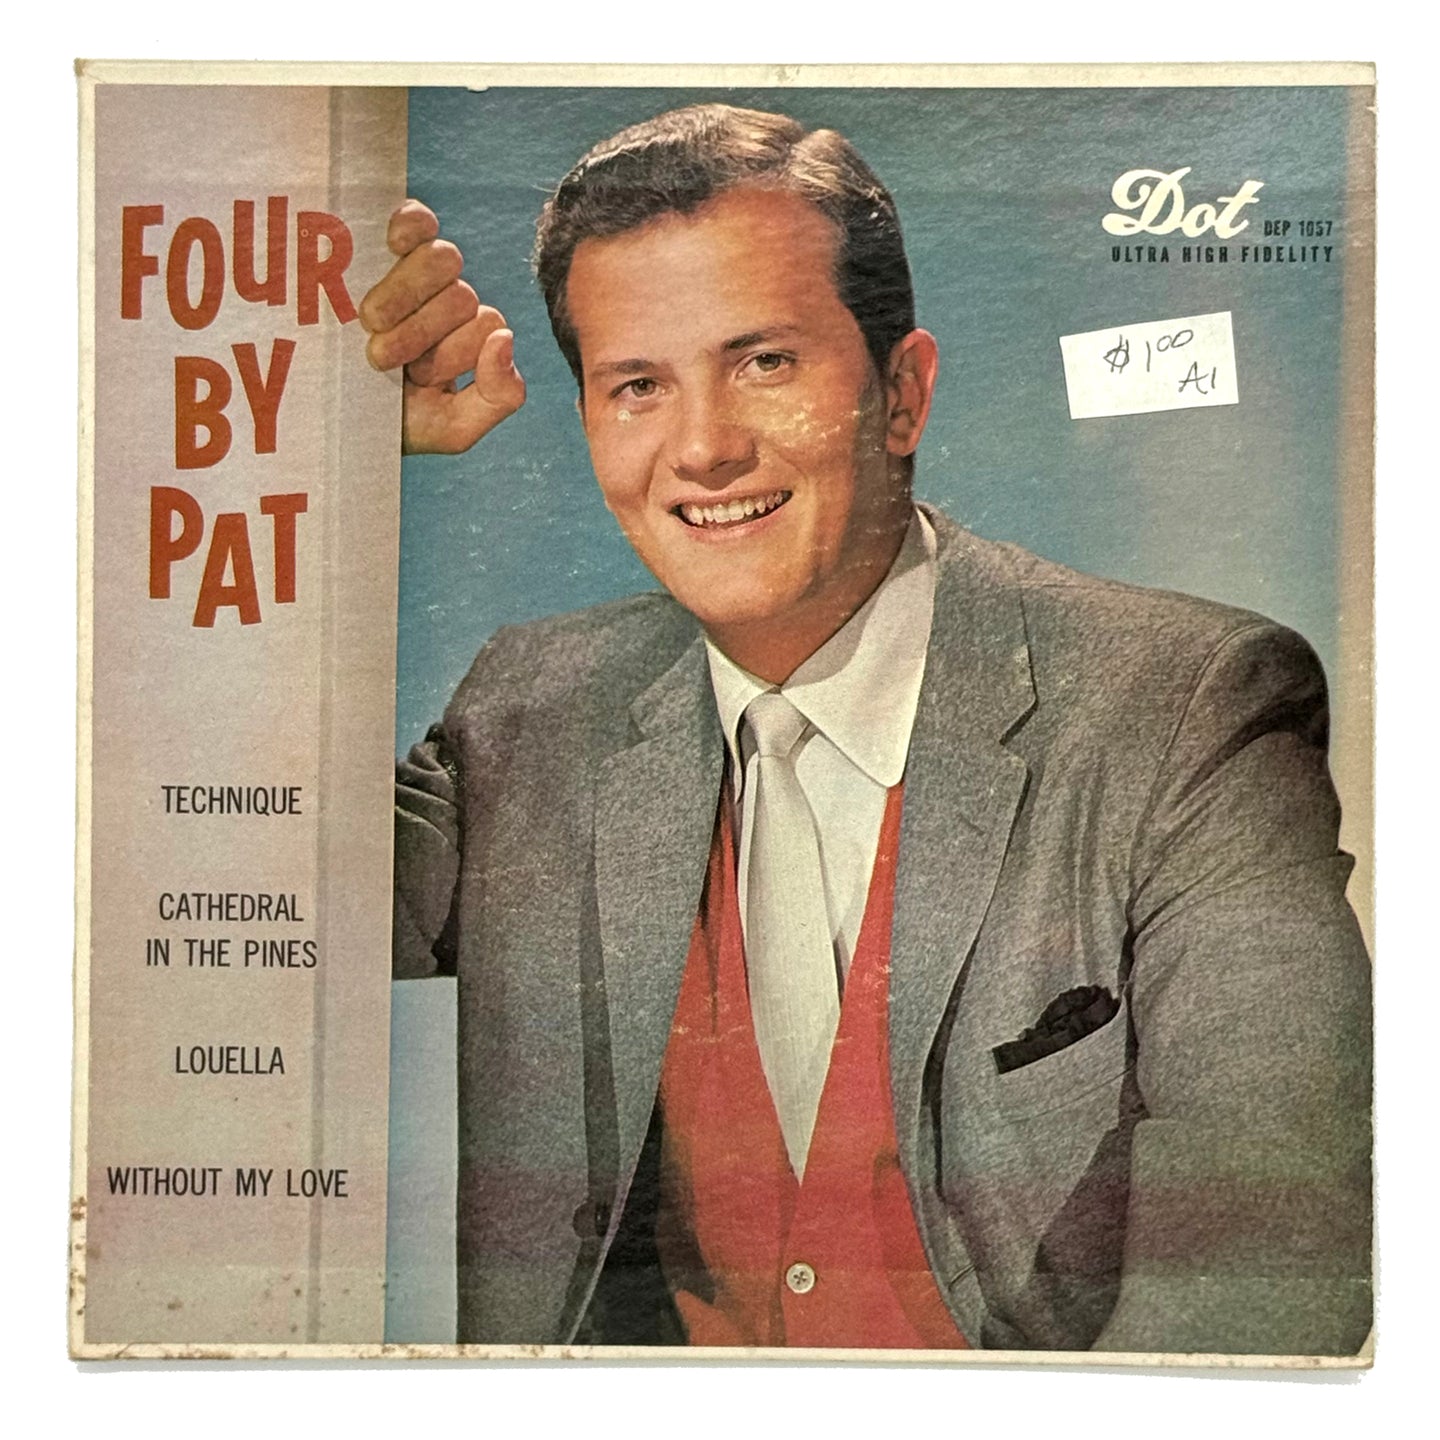 Pat Boone : FOUR BY PAT EP